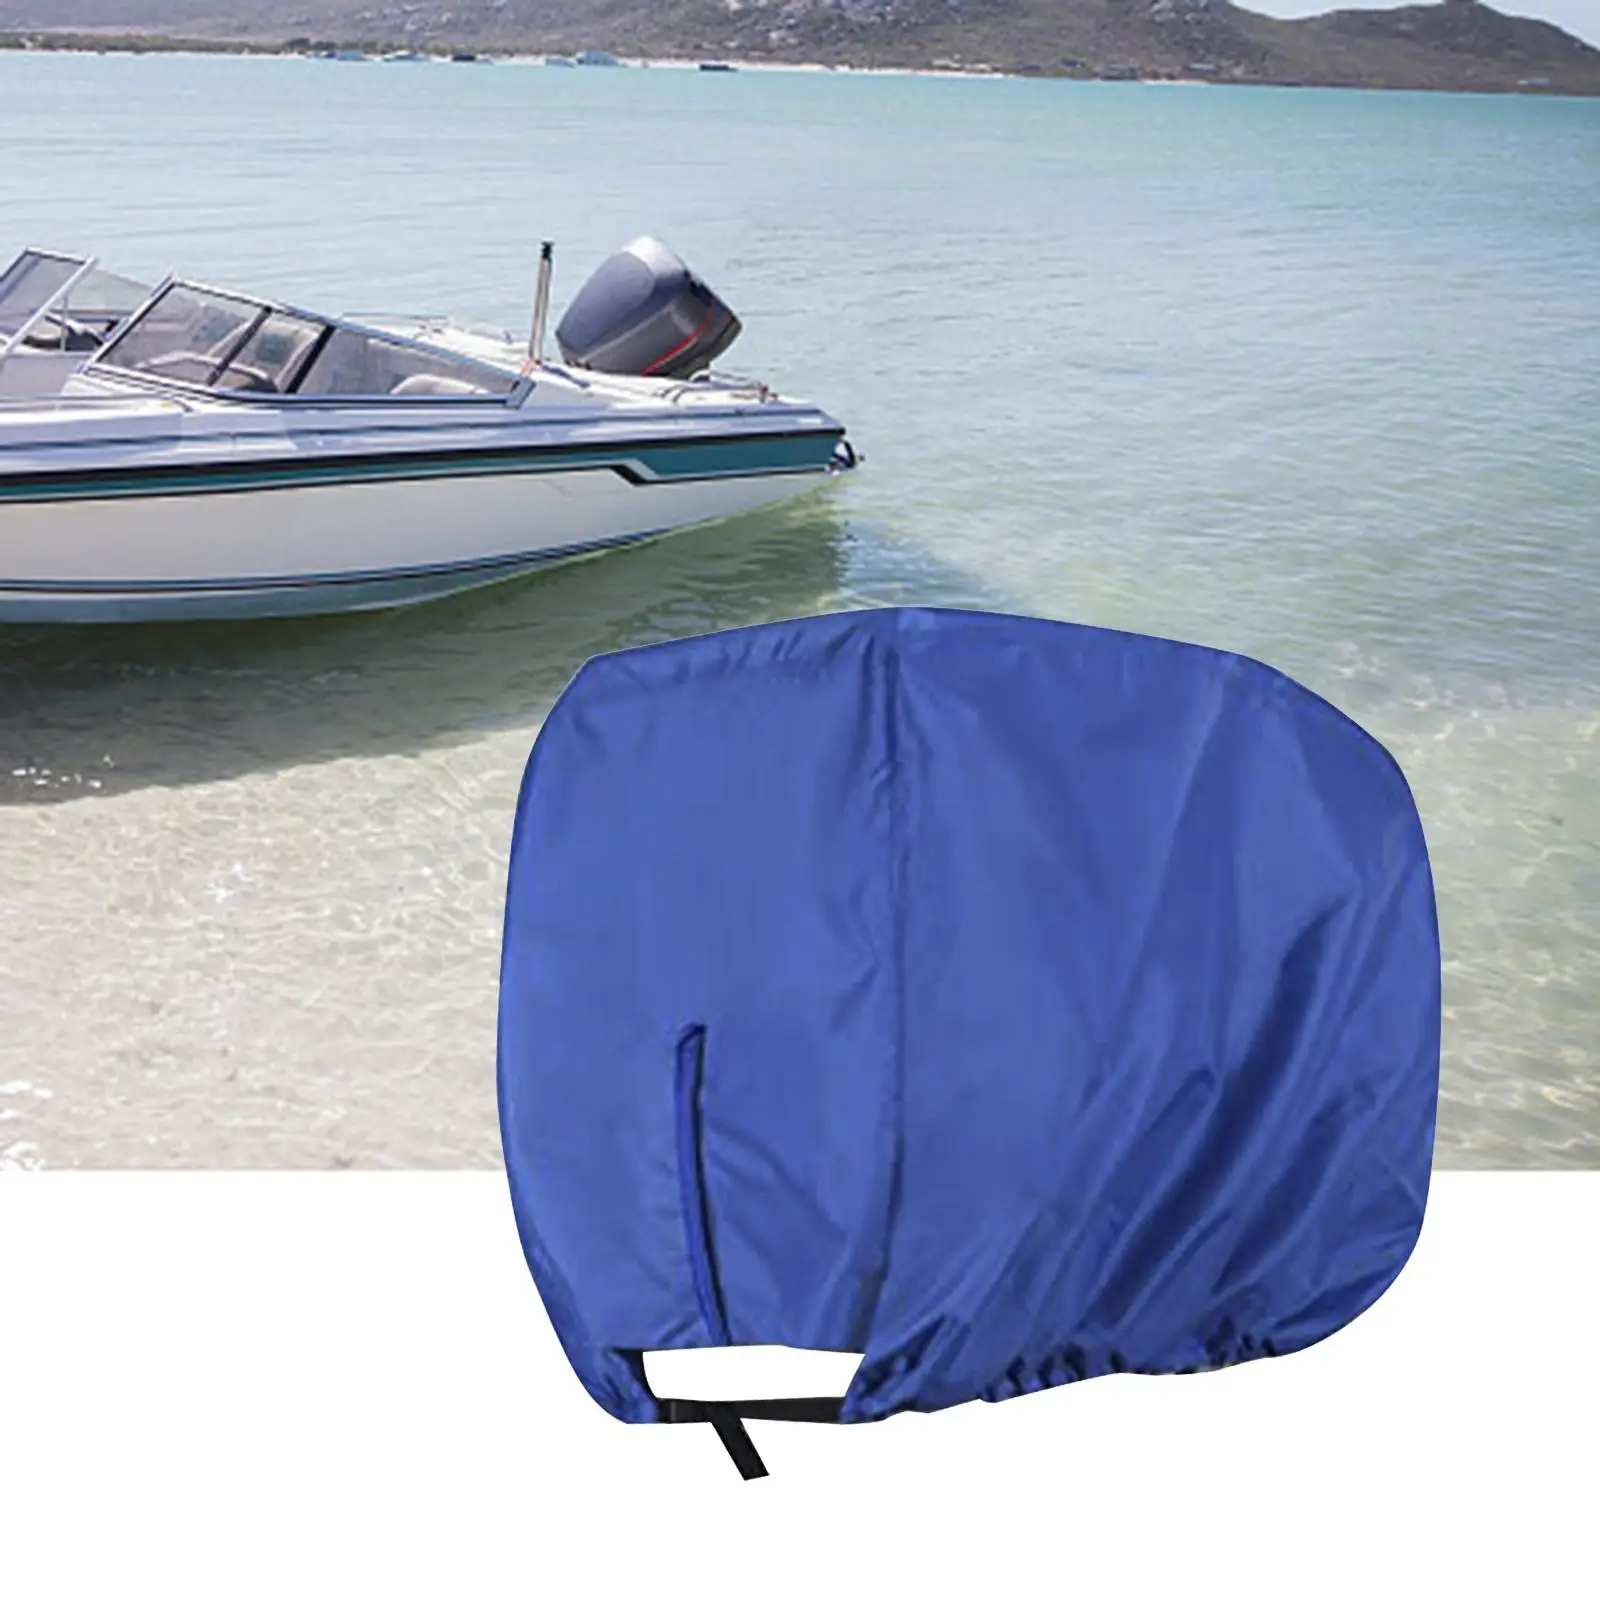 Waterproof Outboard Motor Cover Durable Heavy Duty Vented Boat Engine Hood Covers Outboard Engine Cover for Boat Motor 25-50HP